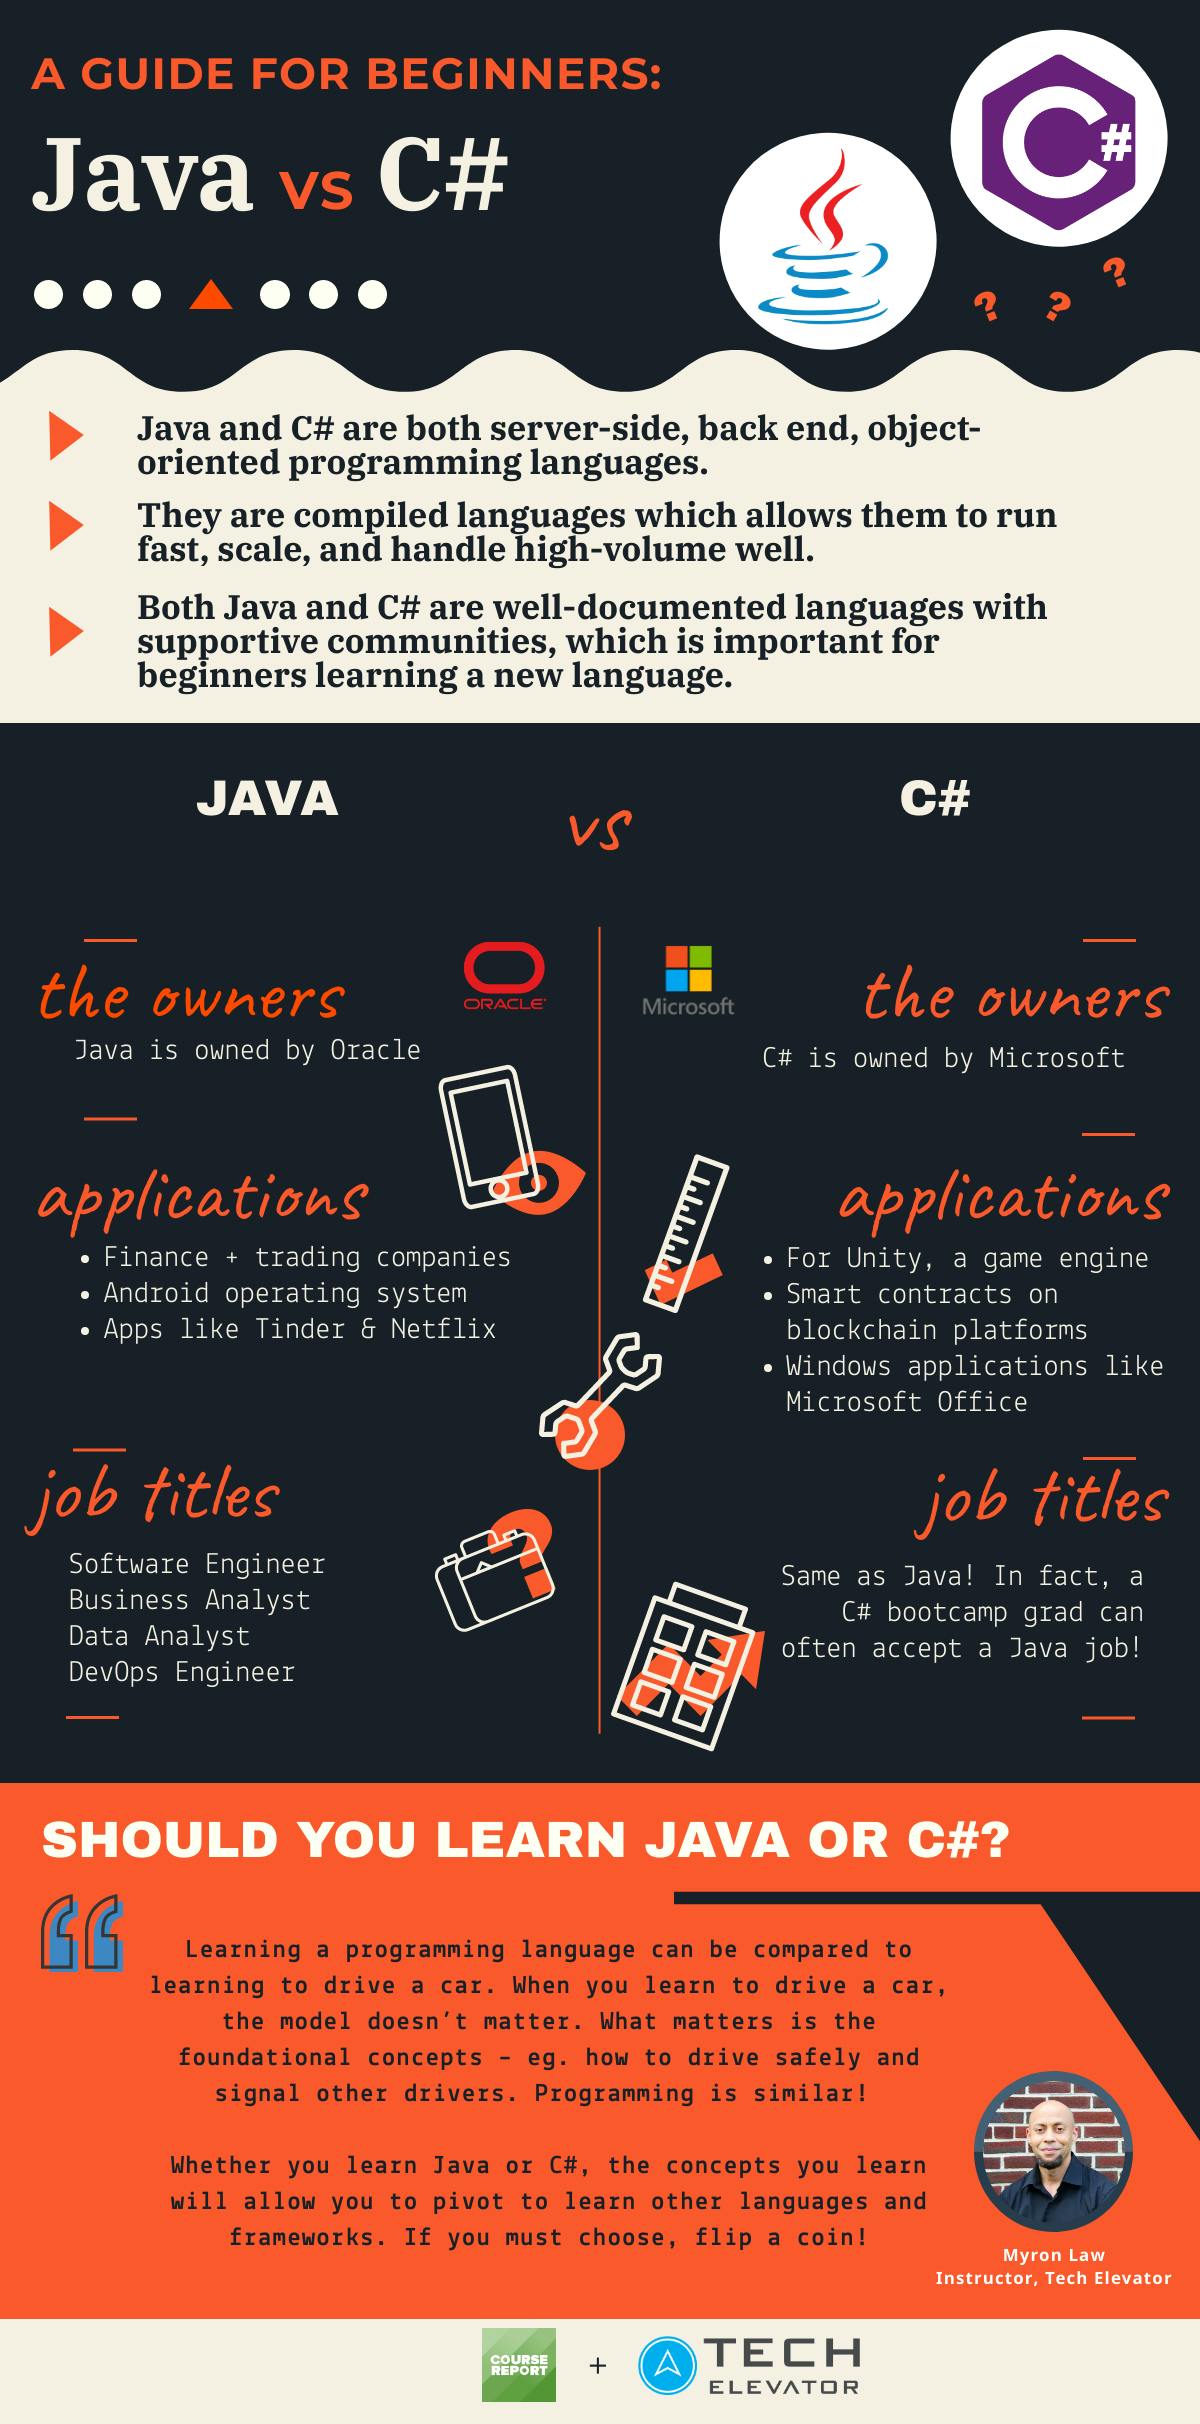 How is C# different from Java?